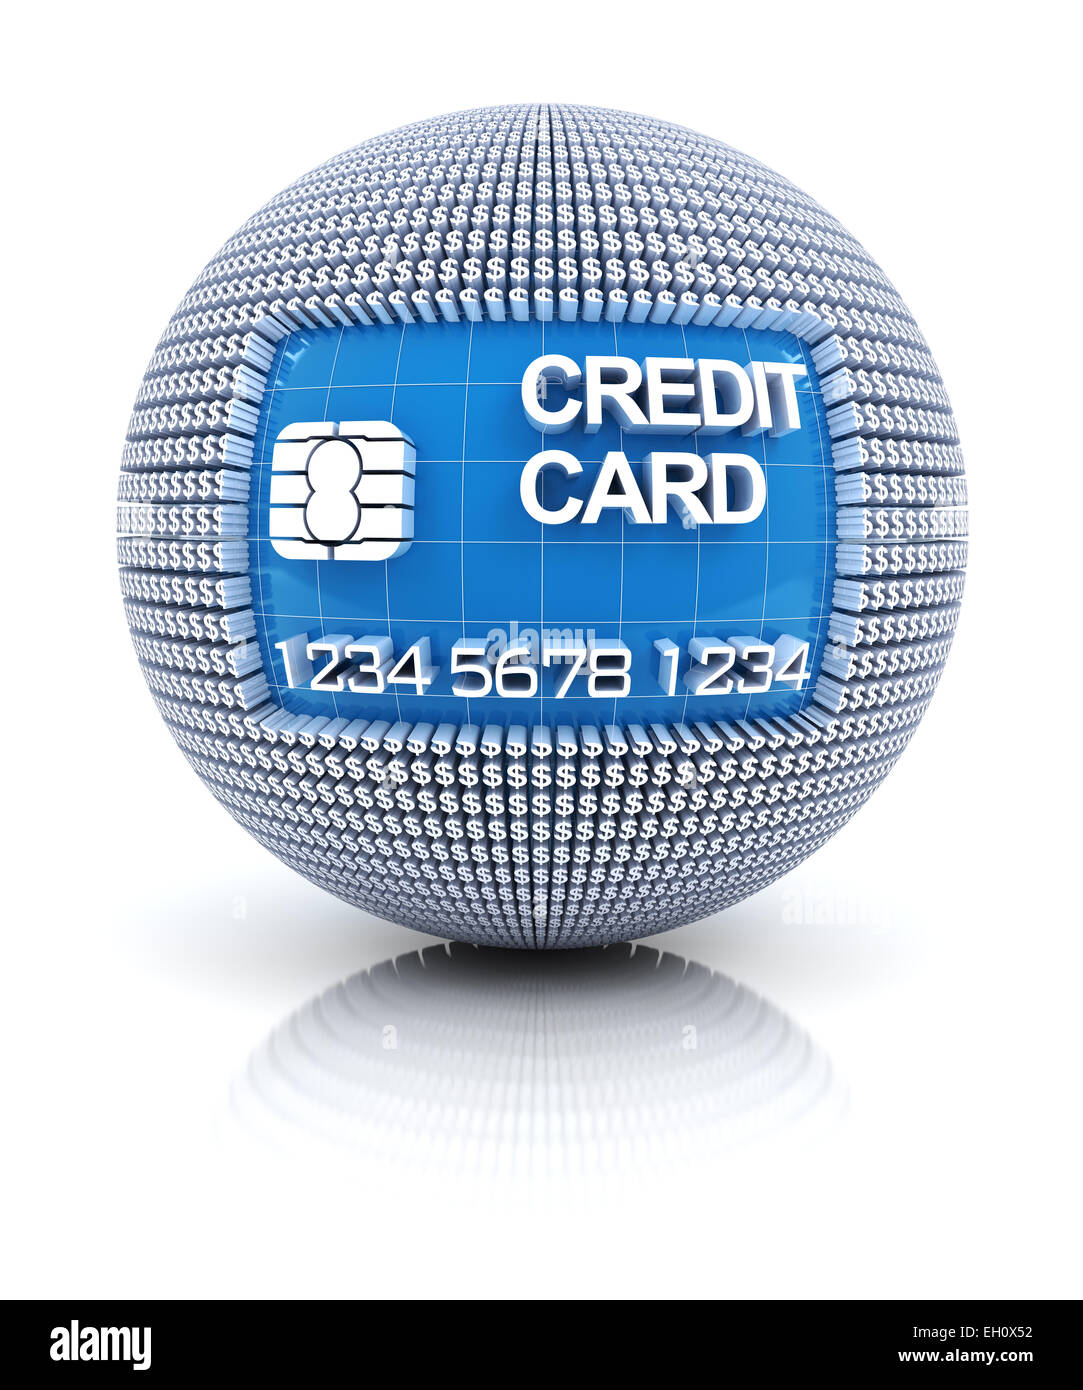 Credit card icon on globe formed by dollar sign Stock Photo